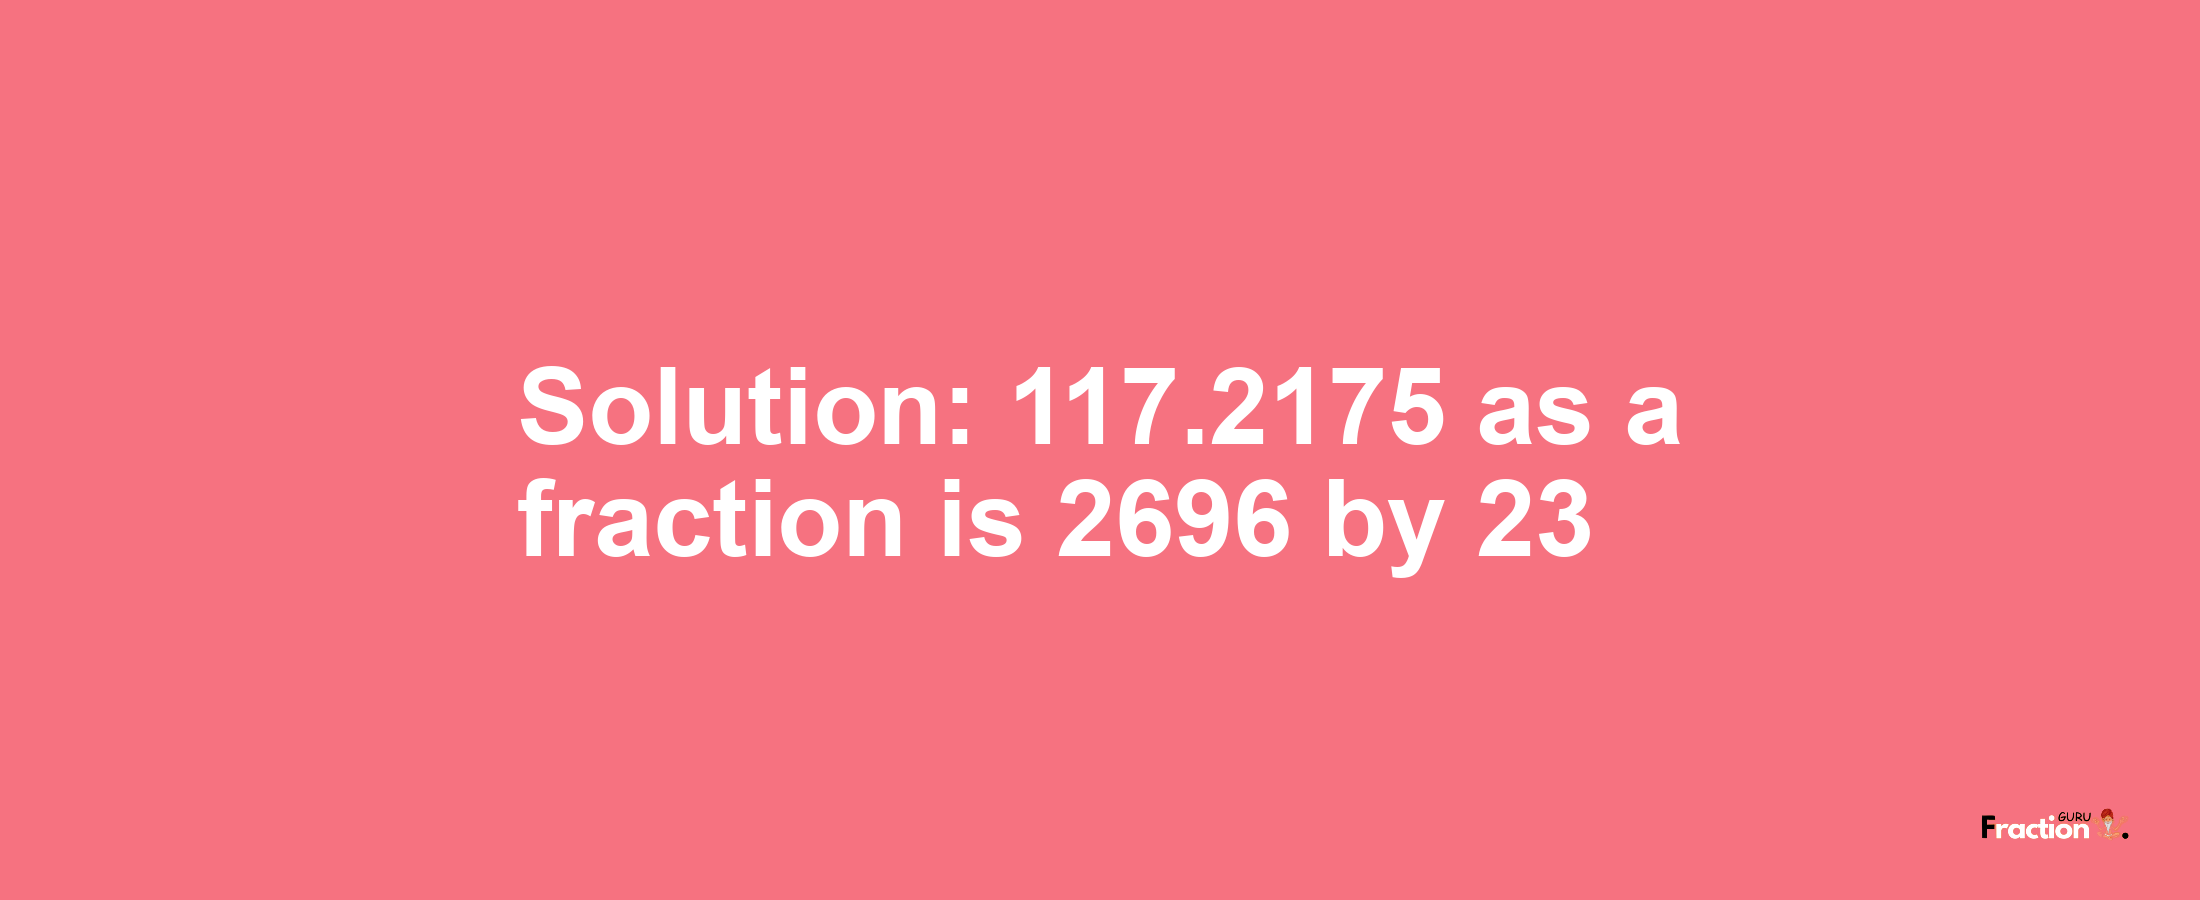 Solution:117.2175 as a fraction is 2696/23